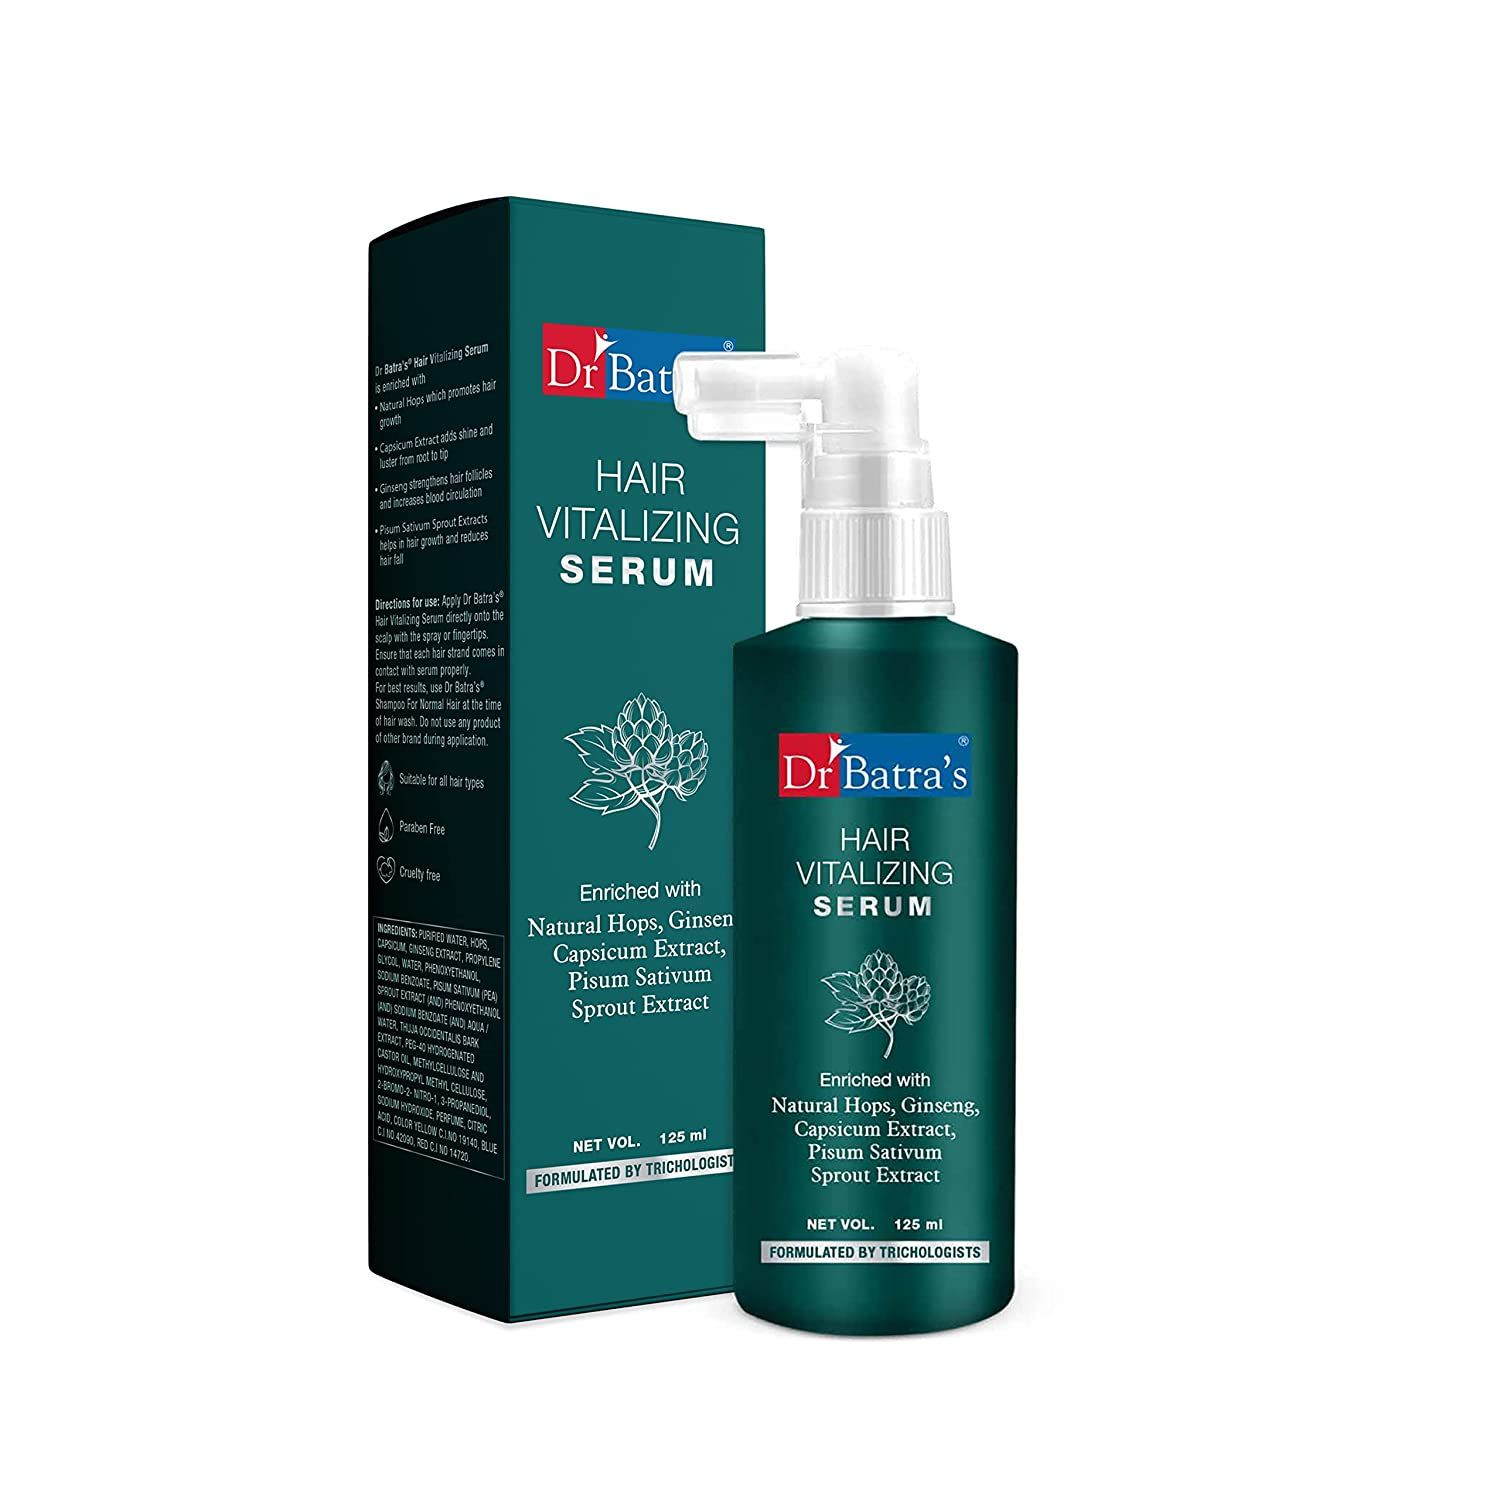 Dr Batra's Hair Vitalizing Serum,Tricologists recommended-125ml,Paraben & Sulphate-Free